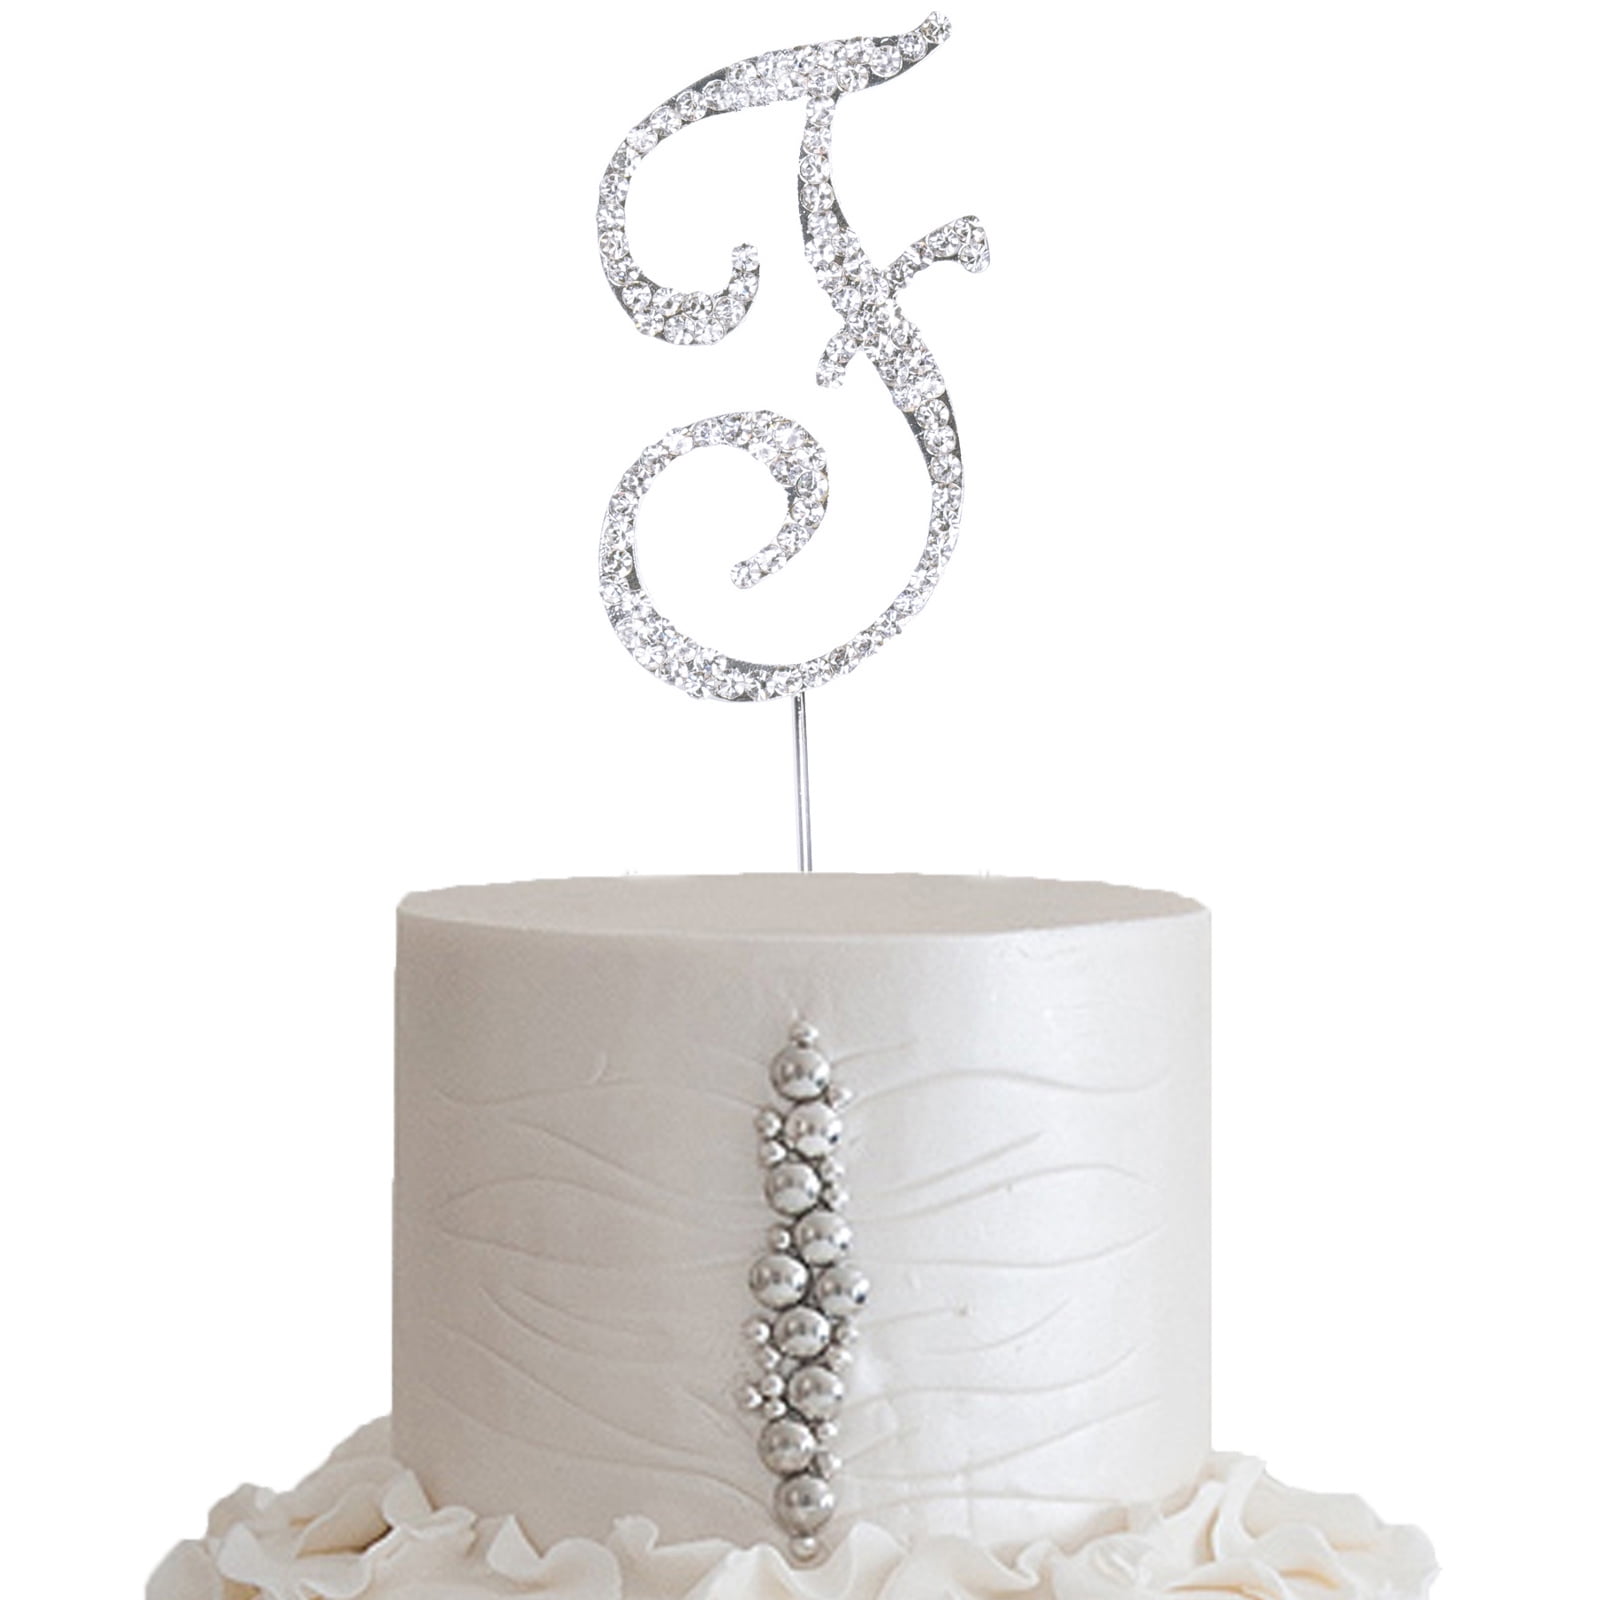 Crystal Rhinestone Silver Cake Topper Letter Table Number Wedding Top Initials 